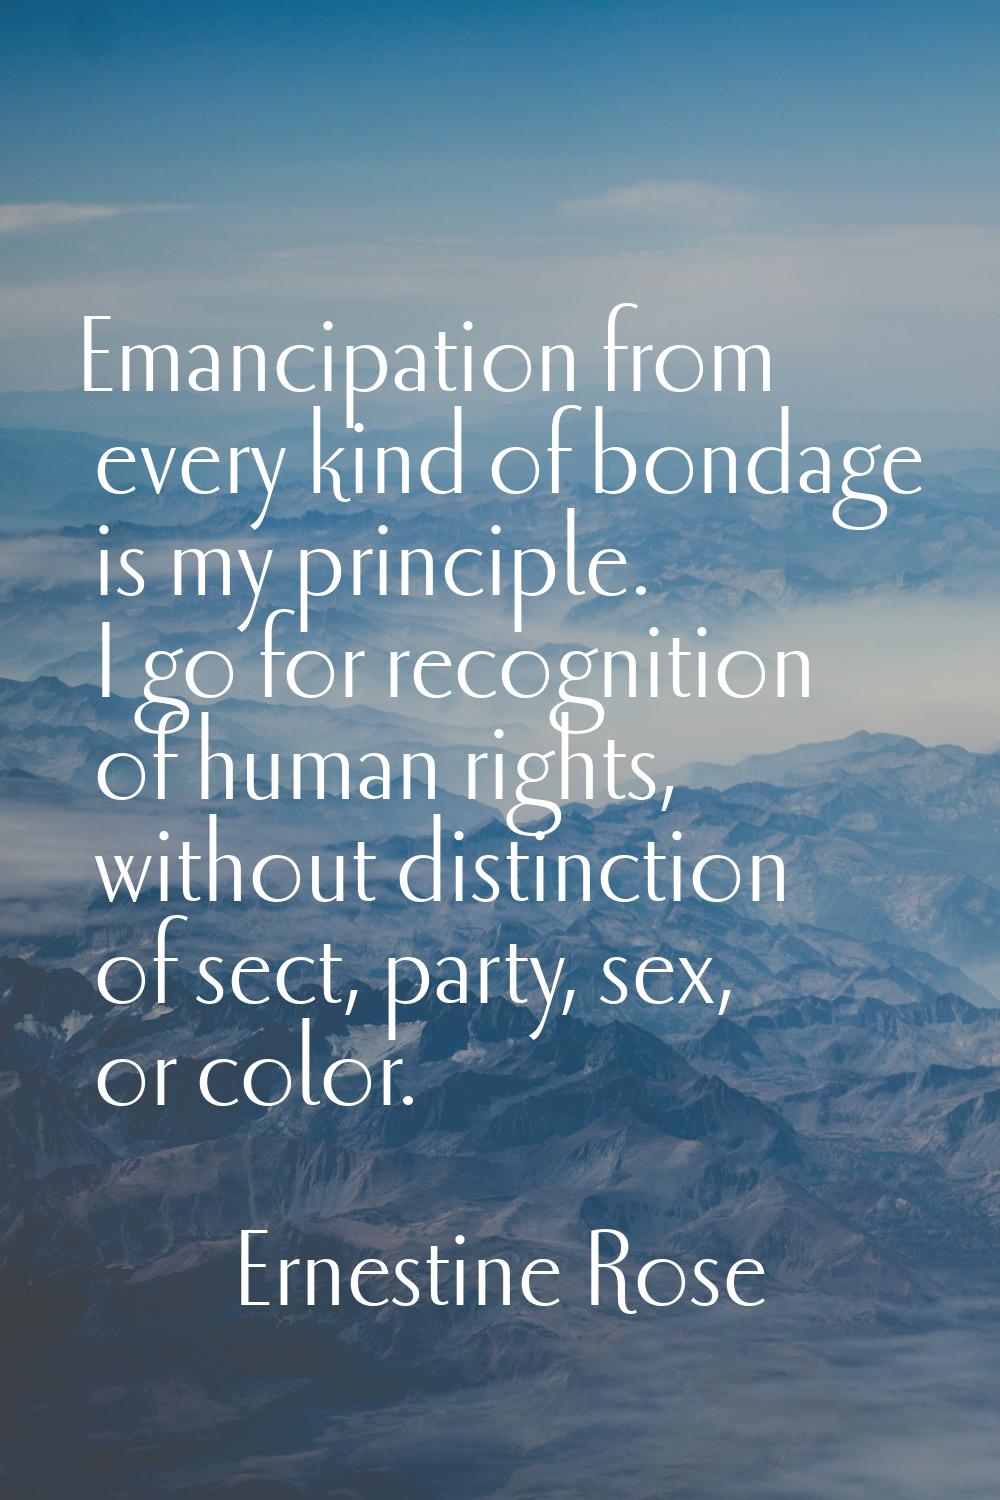 Emancipation from every kind of bondage is my principle. I go for recognition of human rights, with